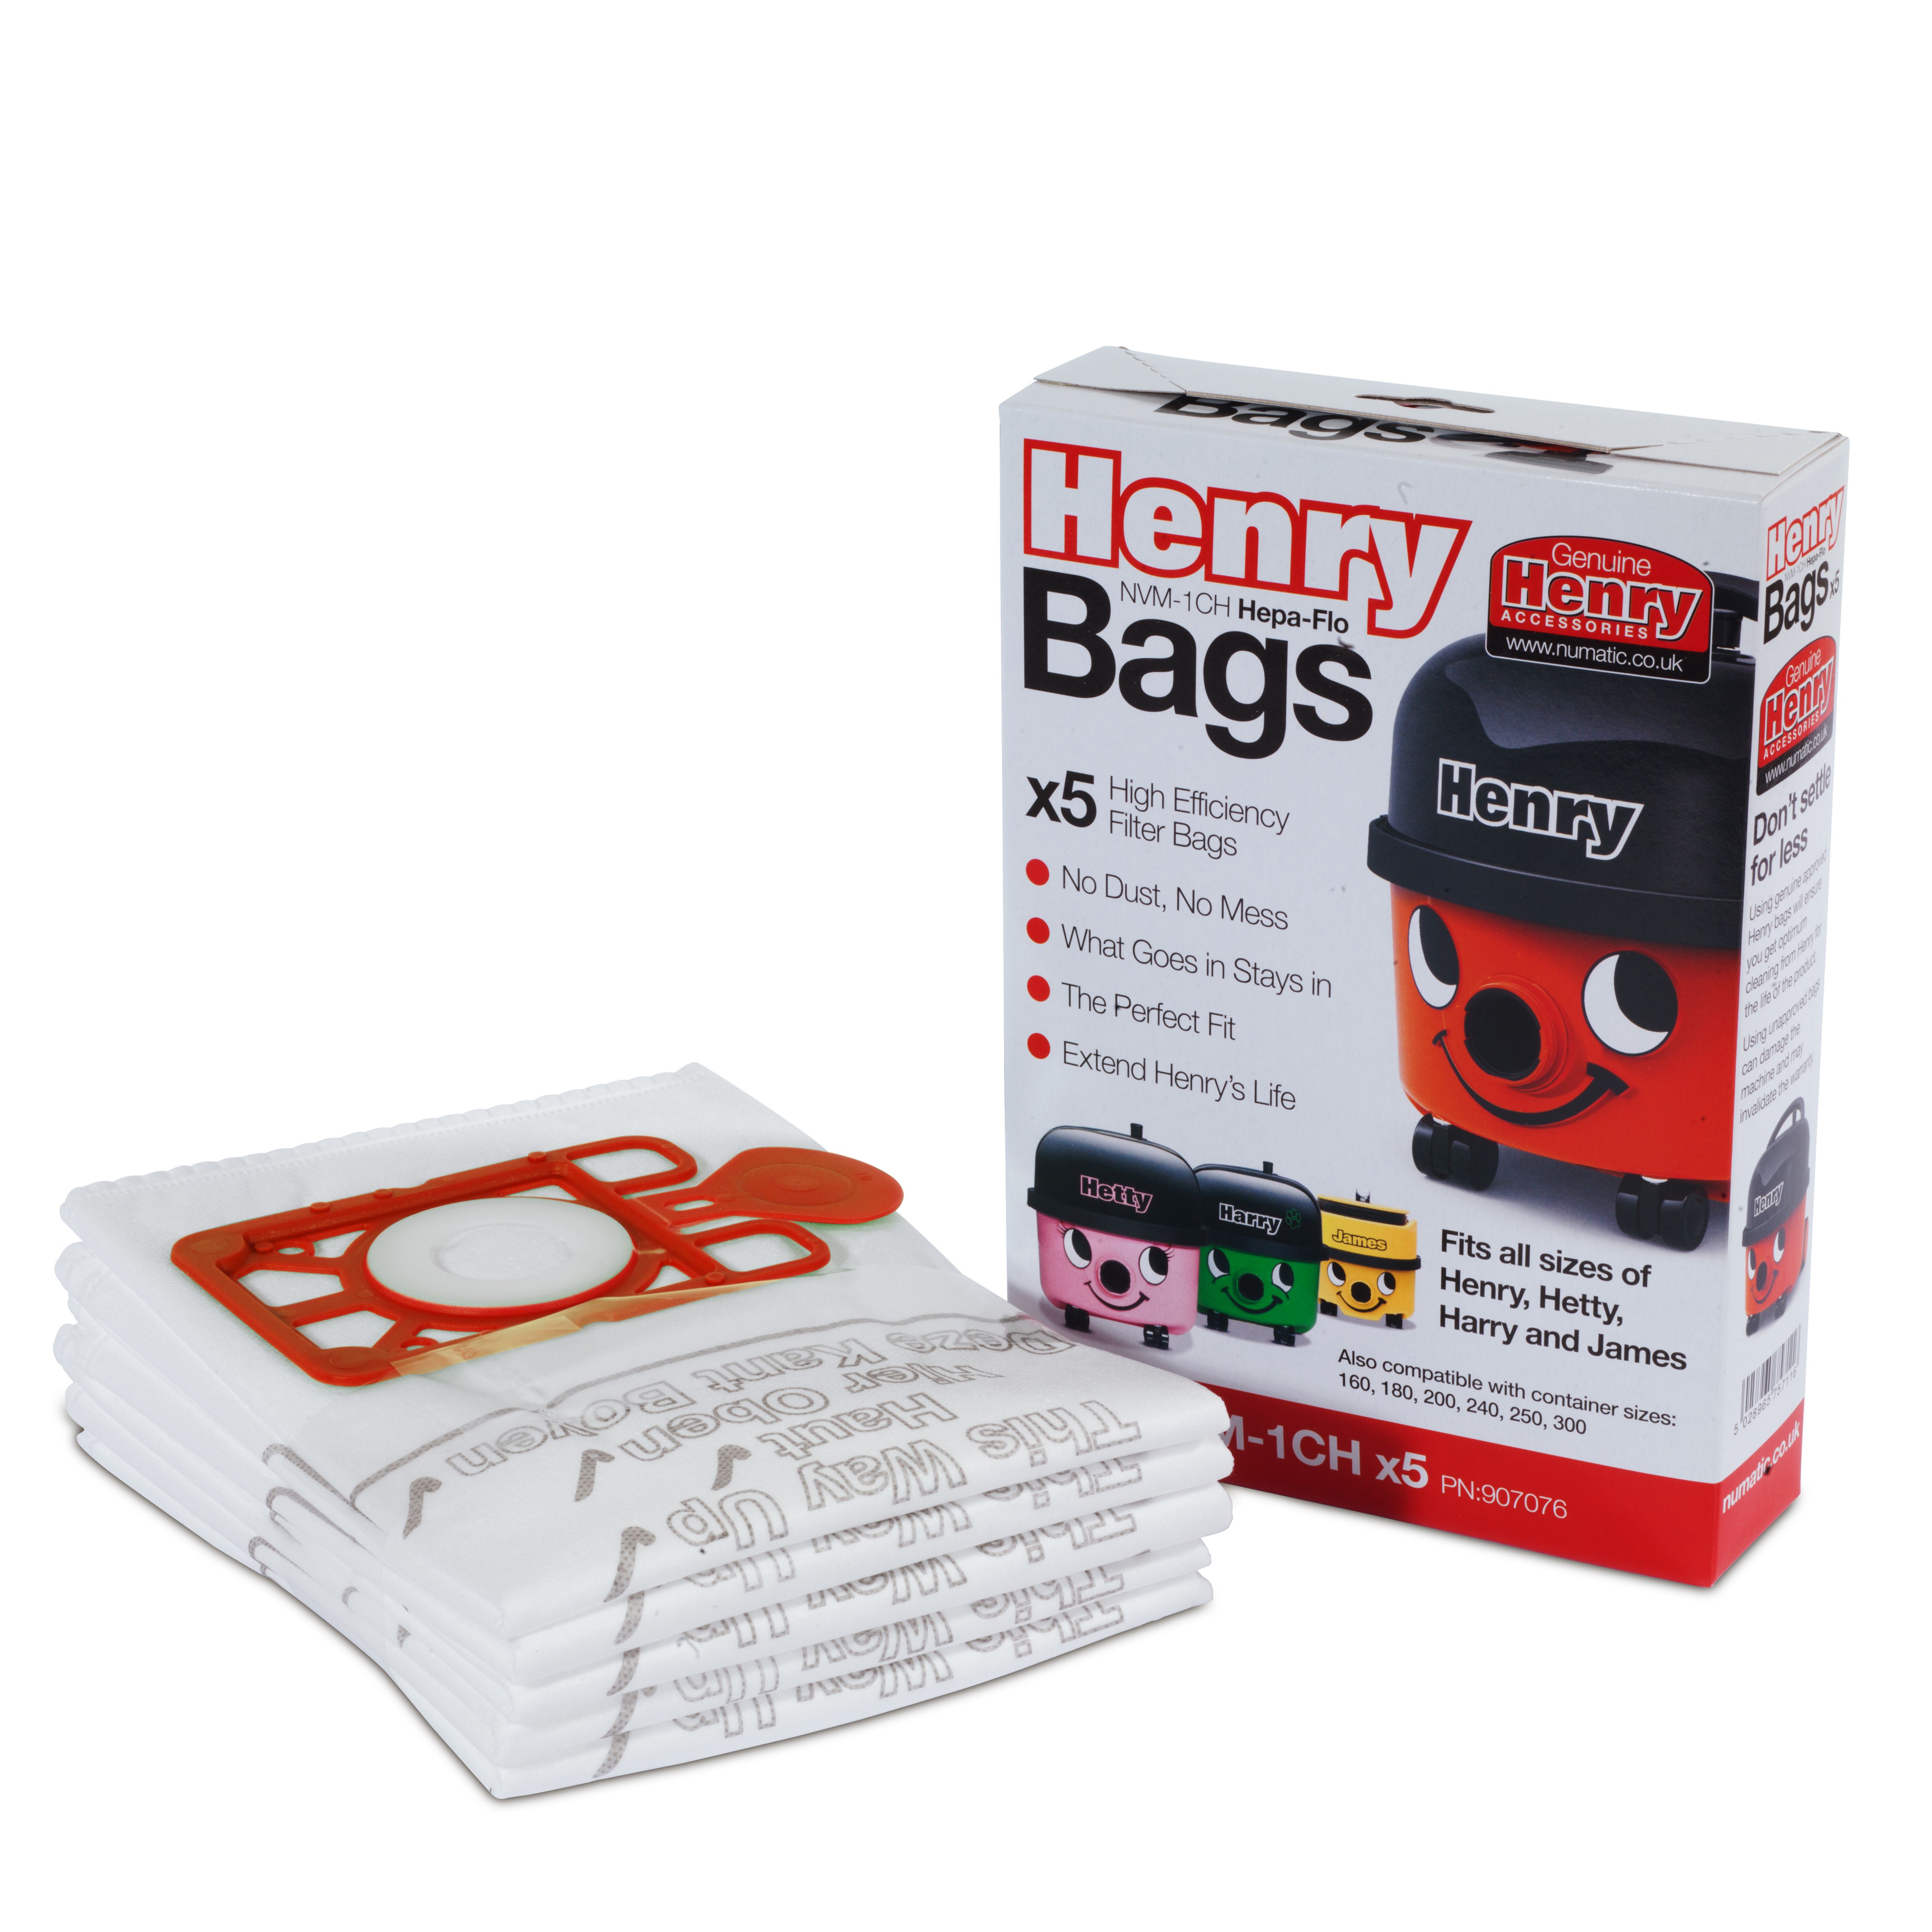 Hoover Compactor Bags